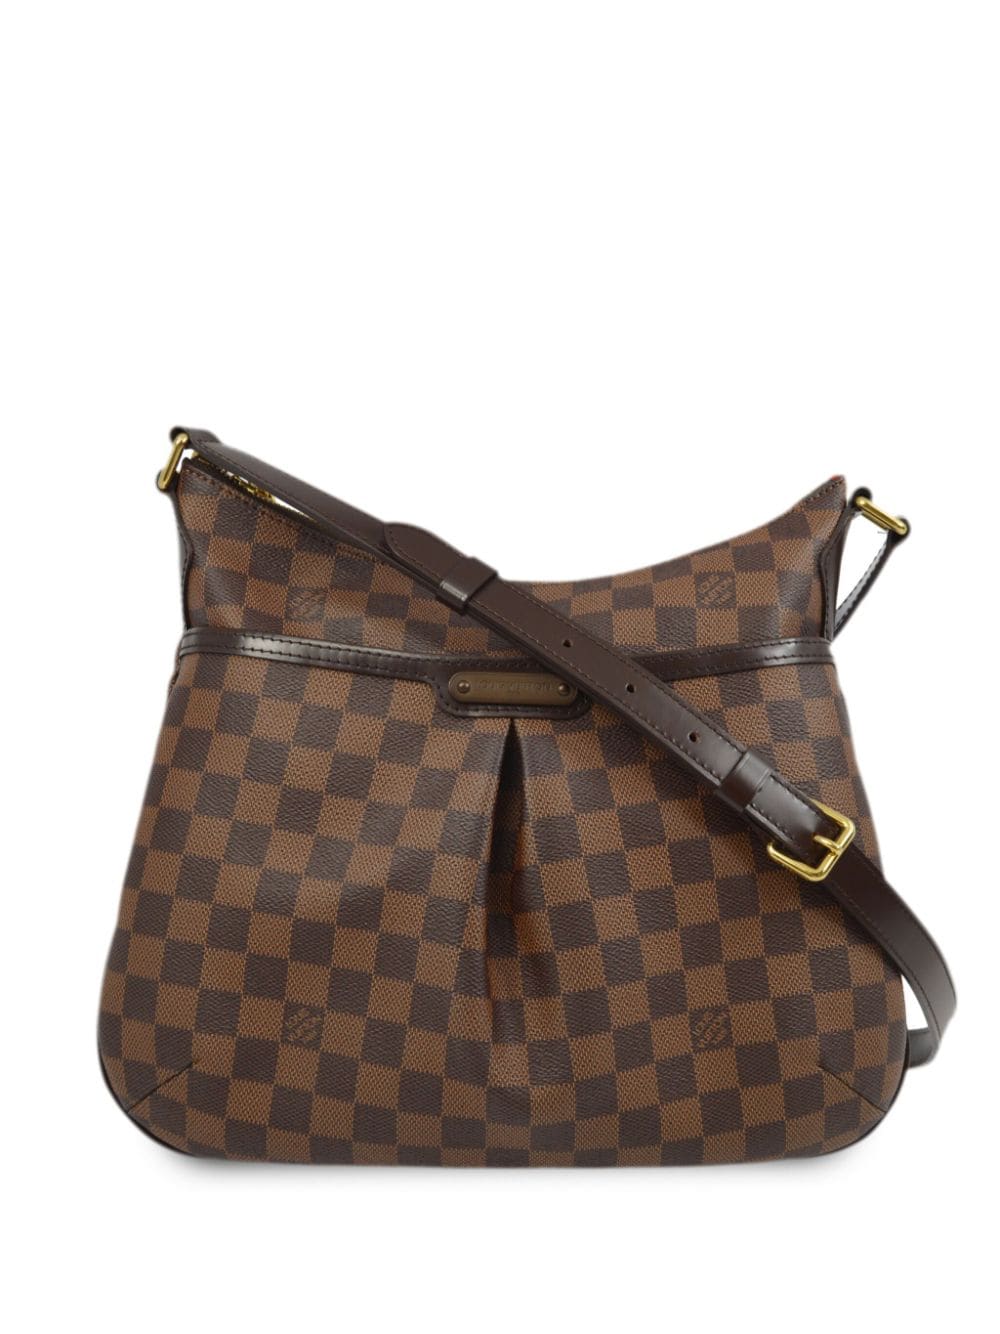 Louis Vuitton Pre-Owned 2016 Bloomsbury PM Umhängetasche - Braun von Louis Vuitton Pre-Owned